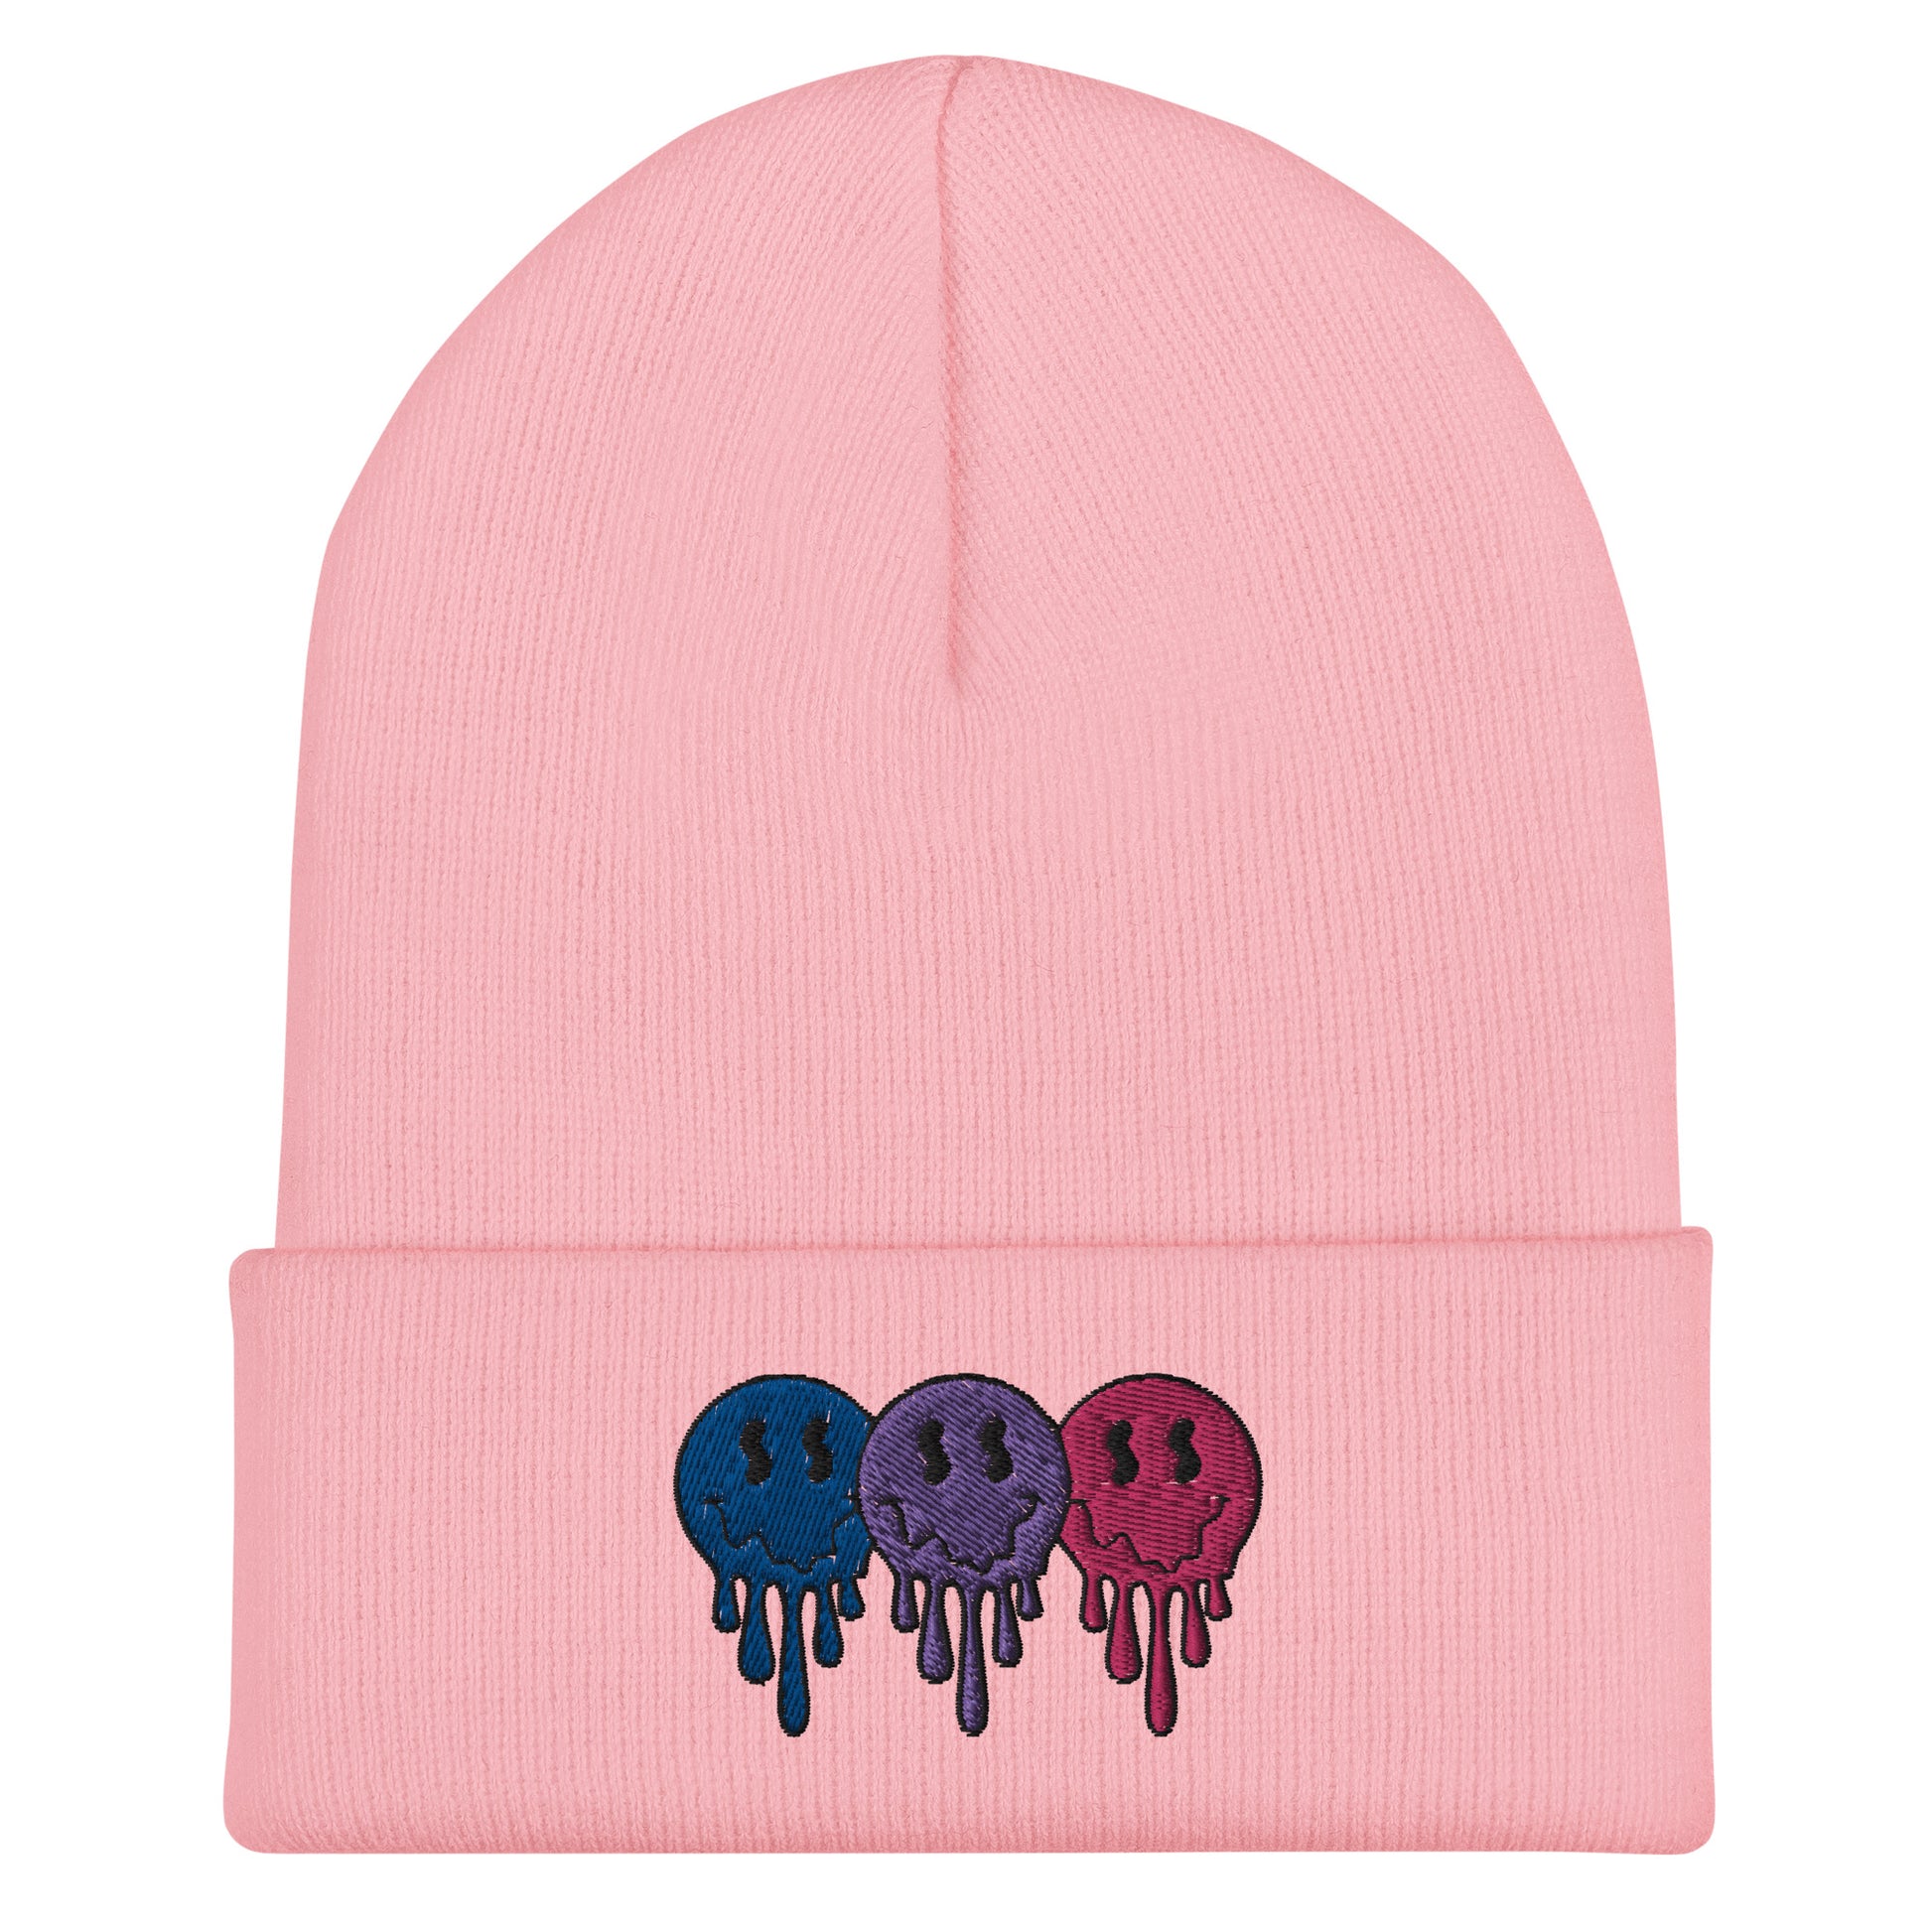 Bisexual Pride Smiley Face Beanie - Rose Gold Co. Shop